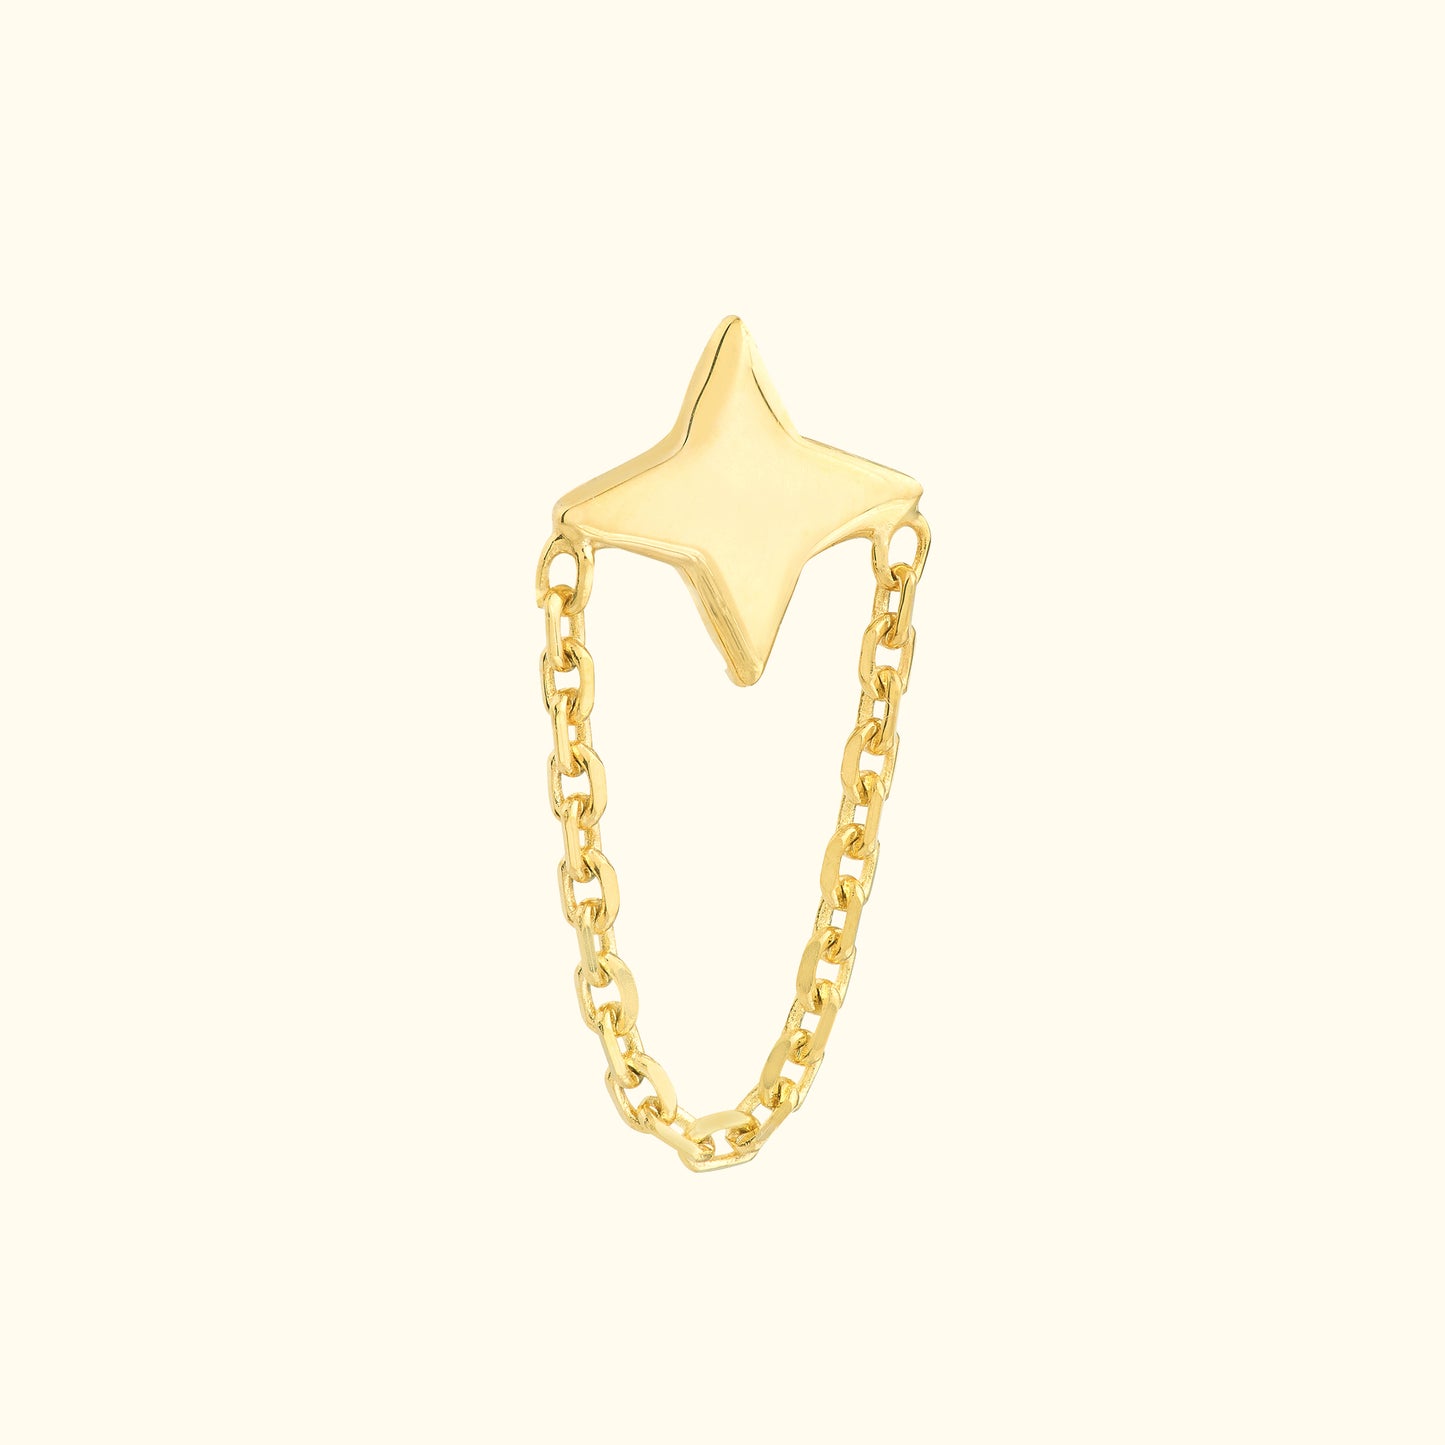 North Star Earrings with Chain Drape